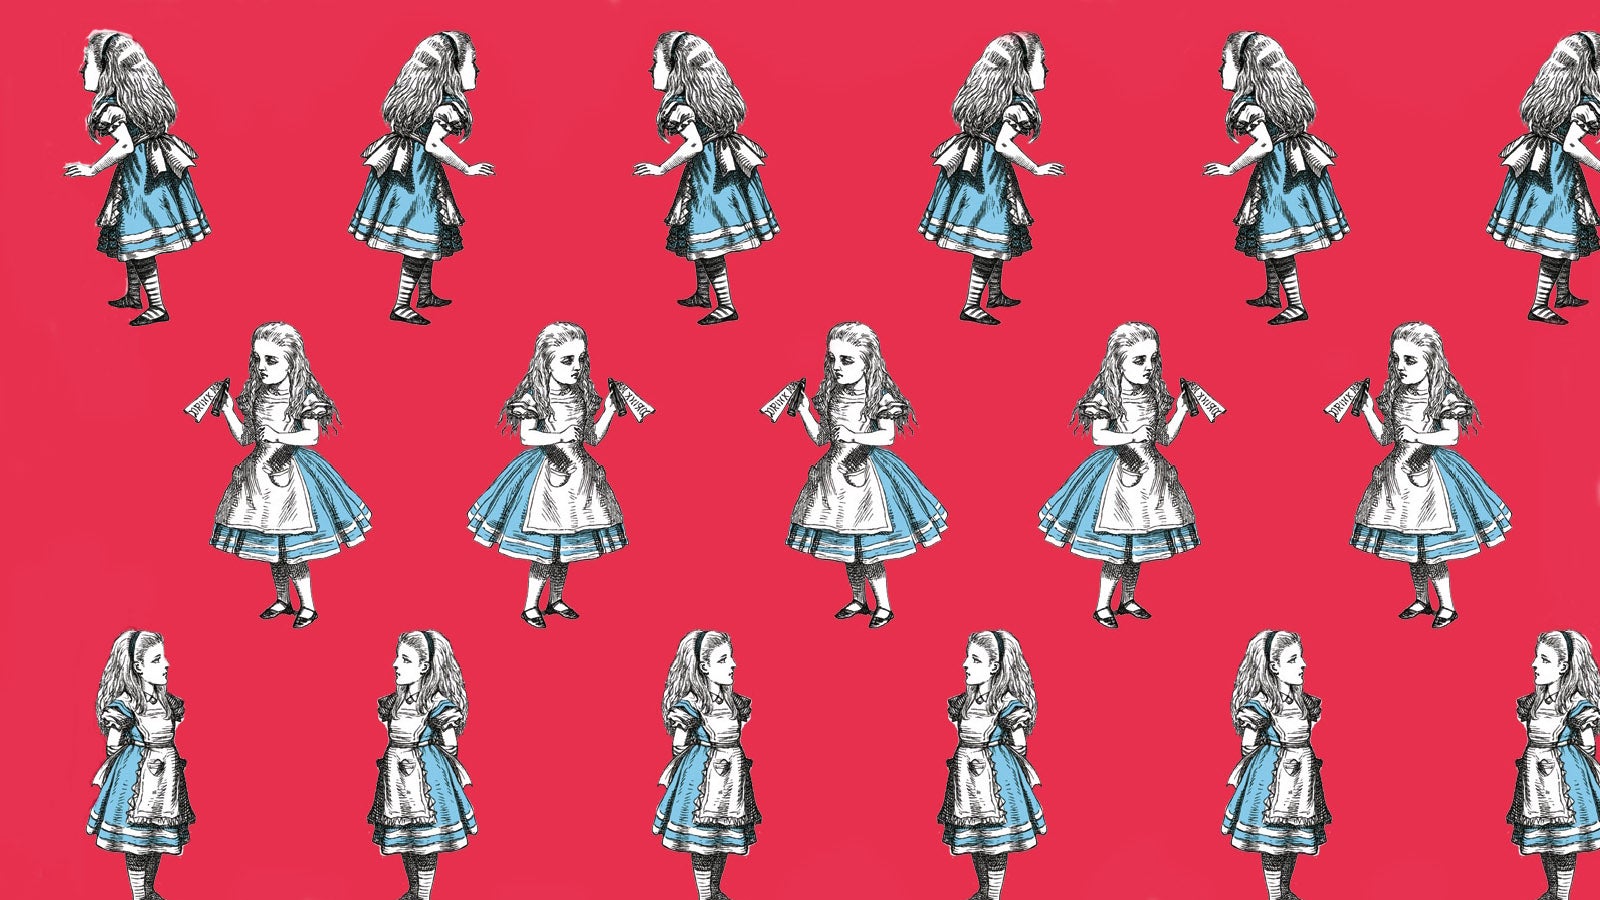 Alice in Wonderland illustrations on a red background